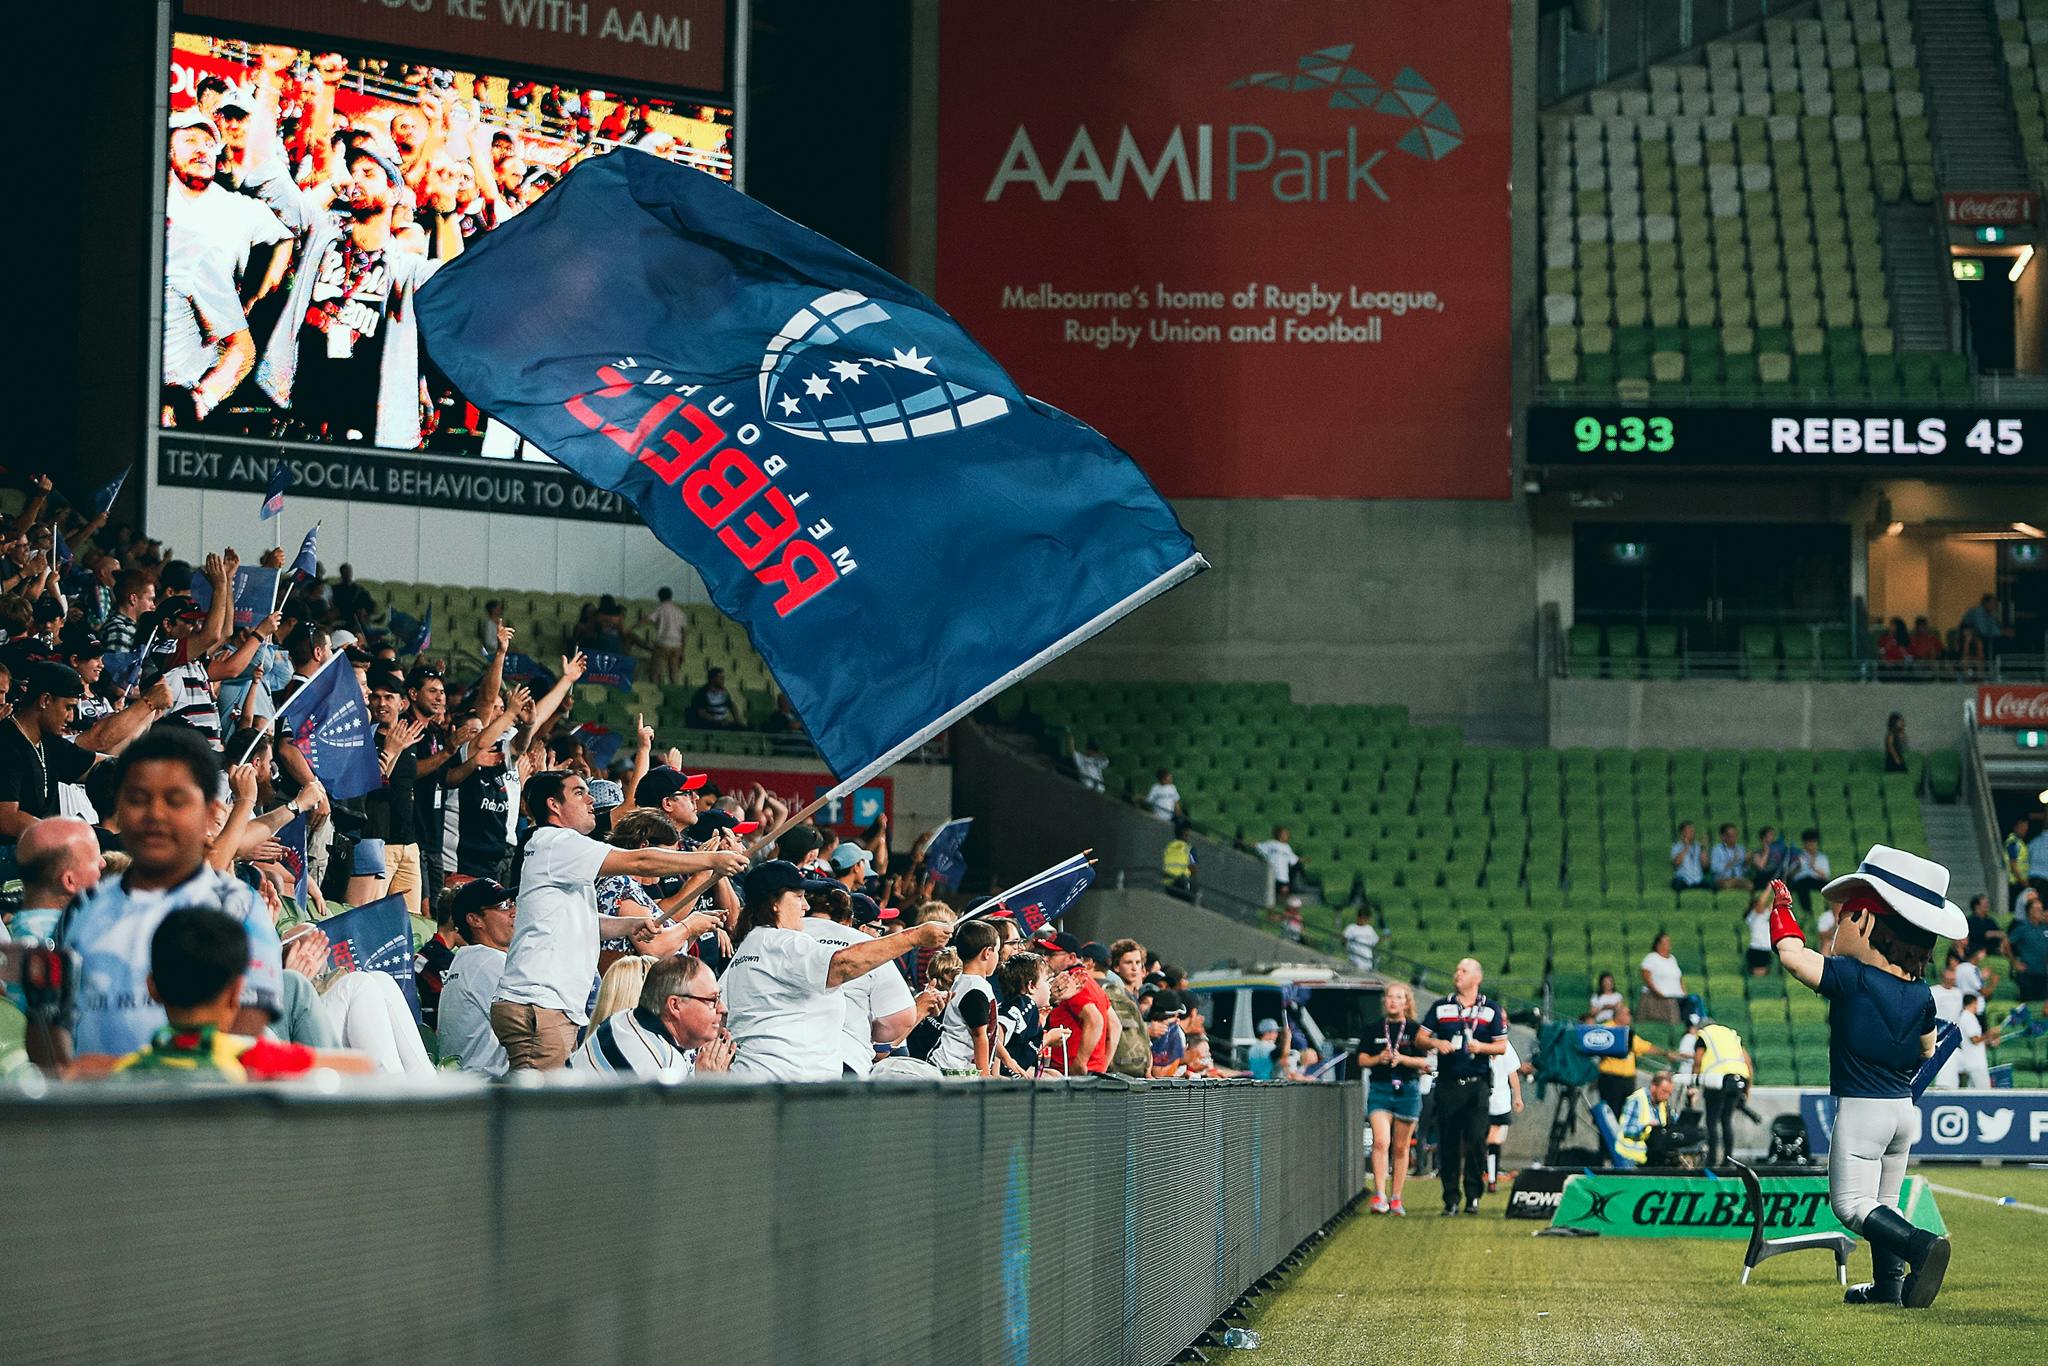 AAMI has extended its naming rights of Melbourne’s iconic Rectangular Stadium ( Pic: Getty images).